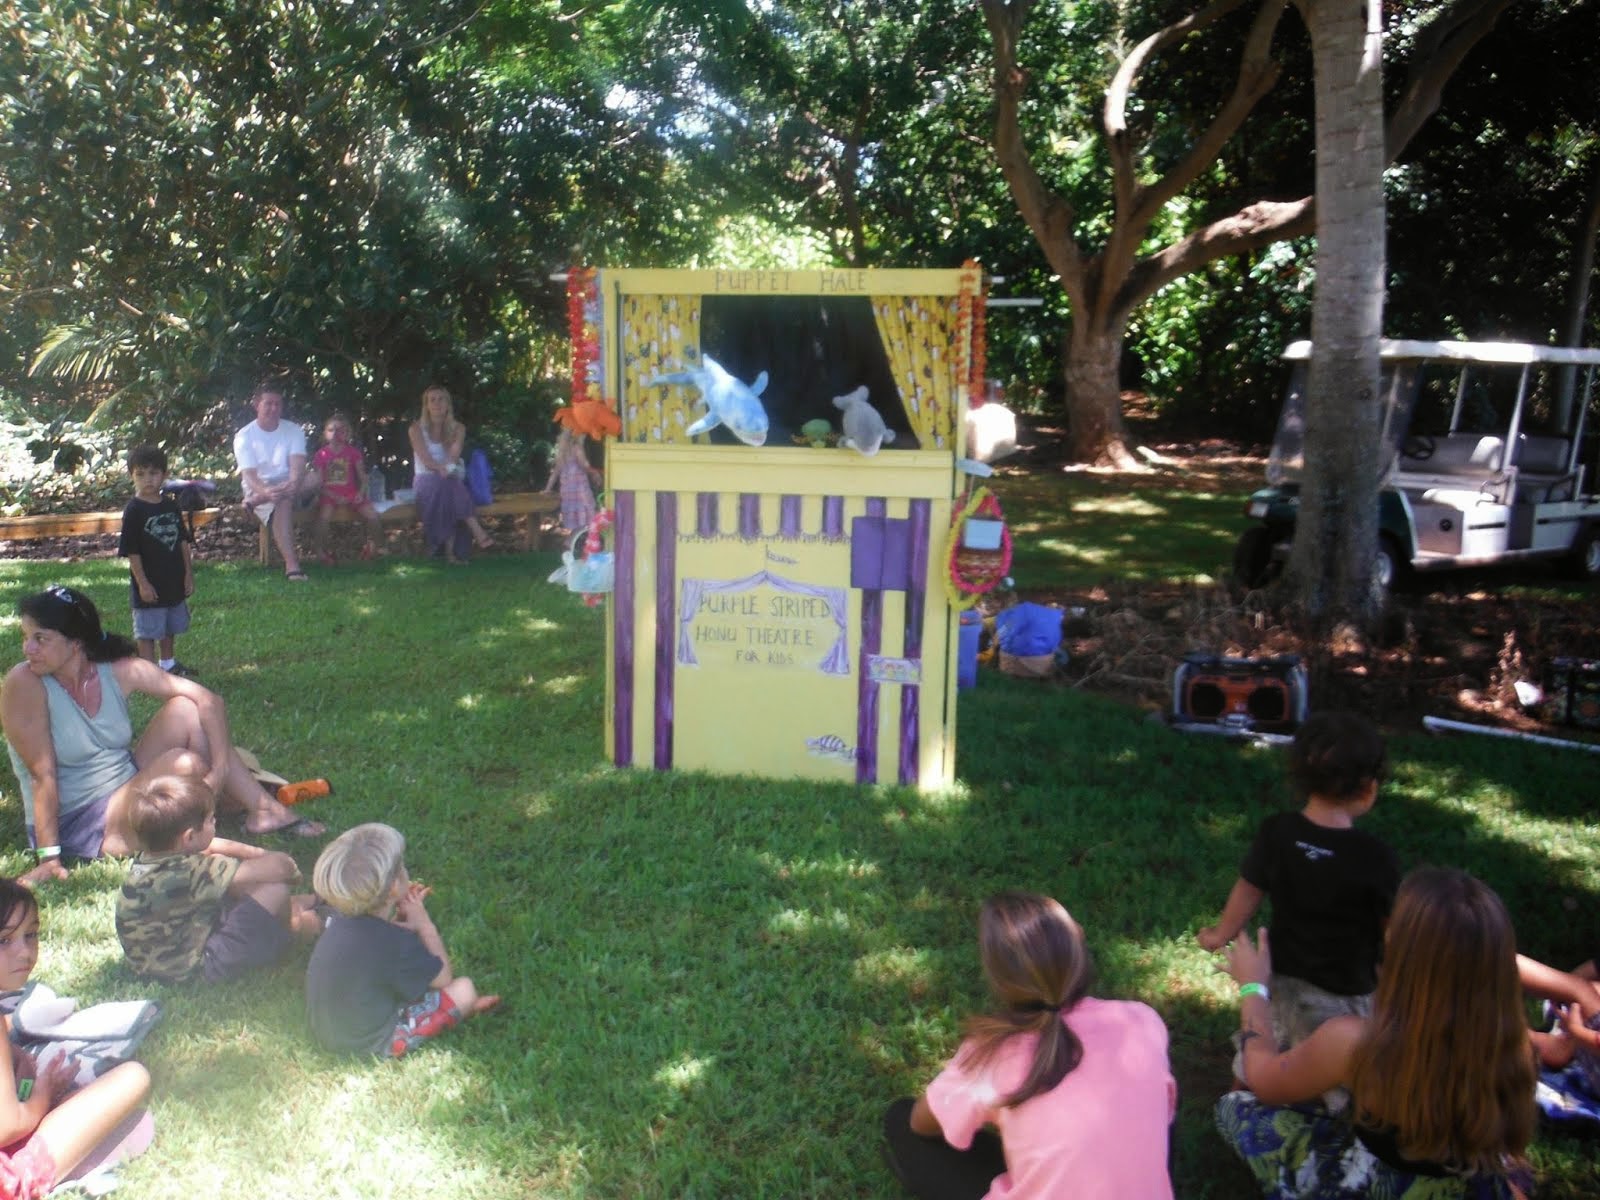 Our Puppet Hale performs free shows at community events.